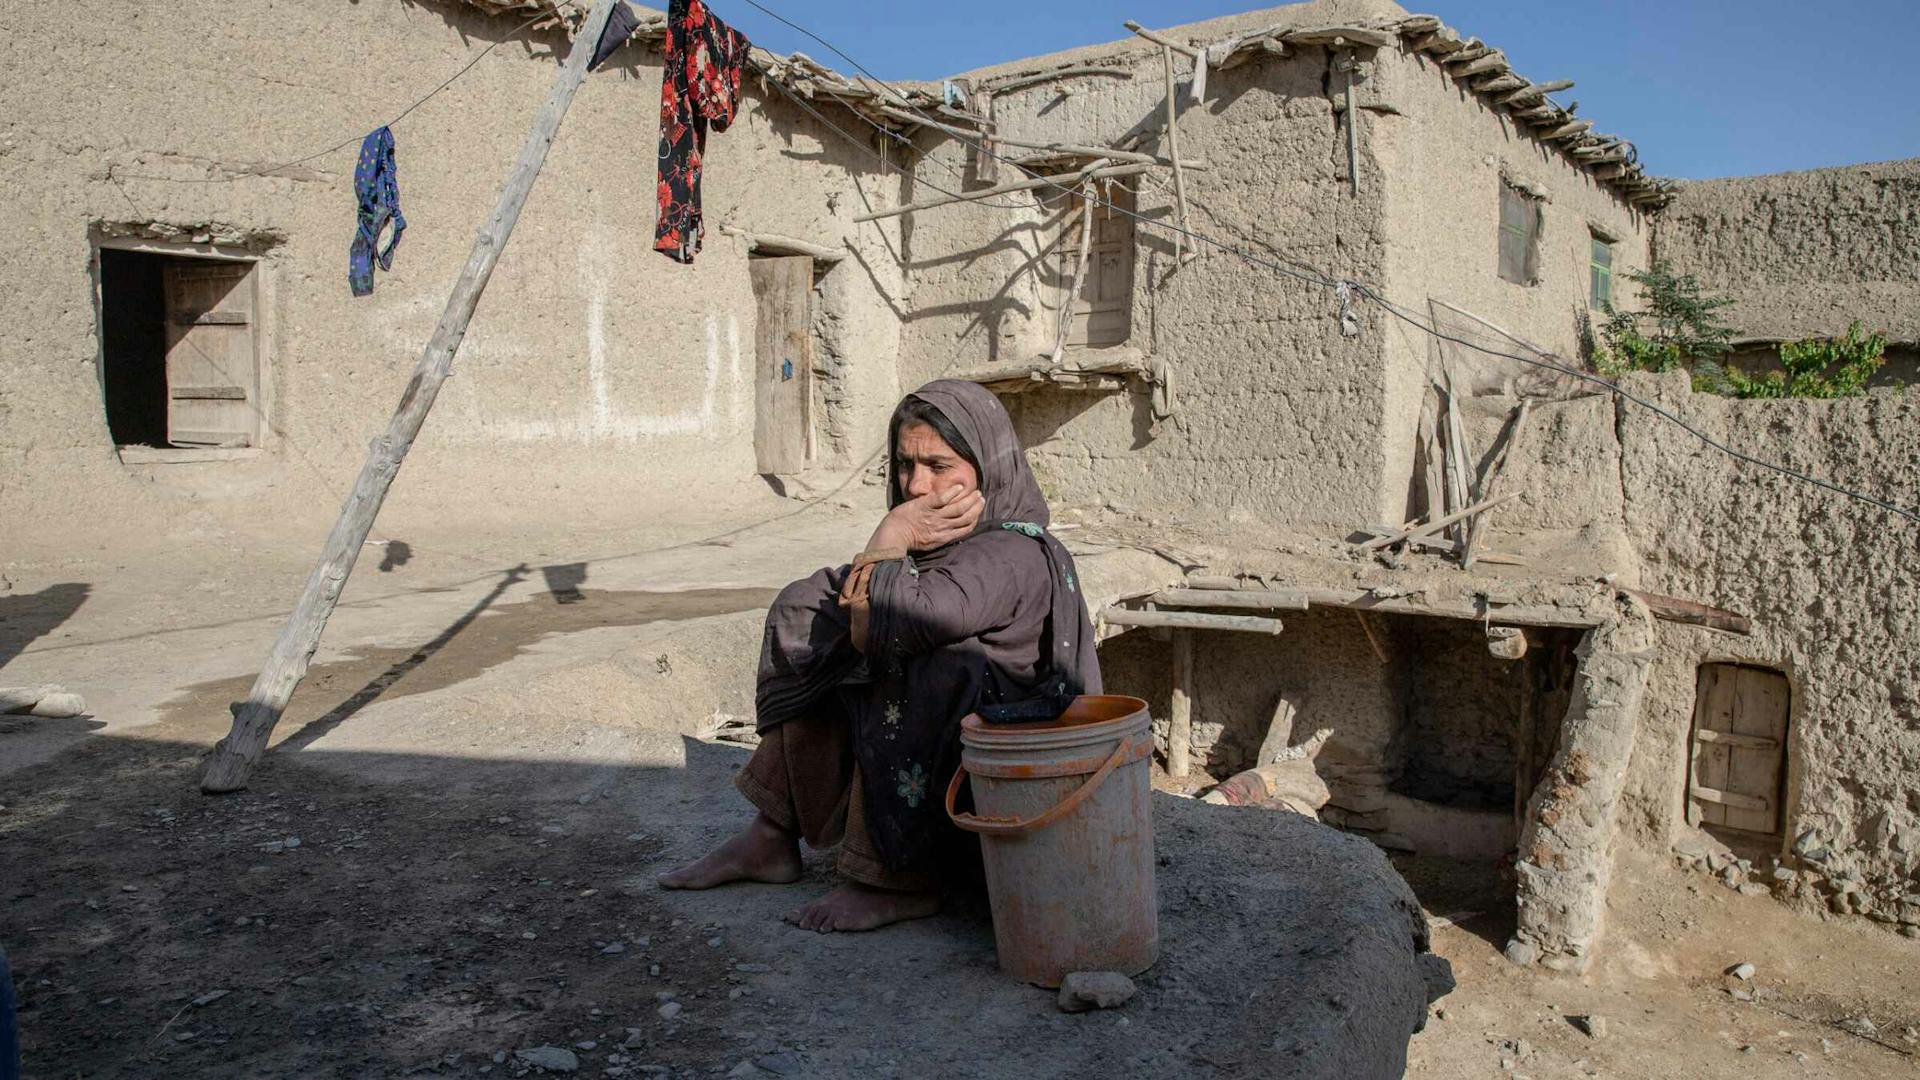 A woman in a hijab looks solemn as she sits alone in her dusty backyard.